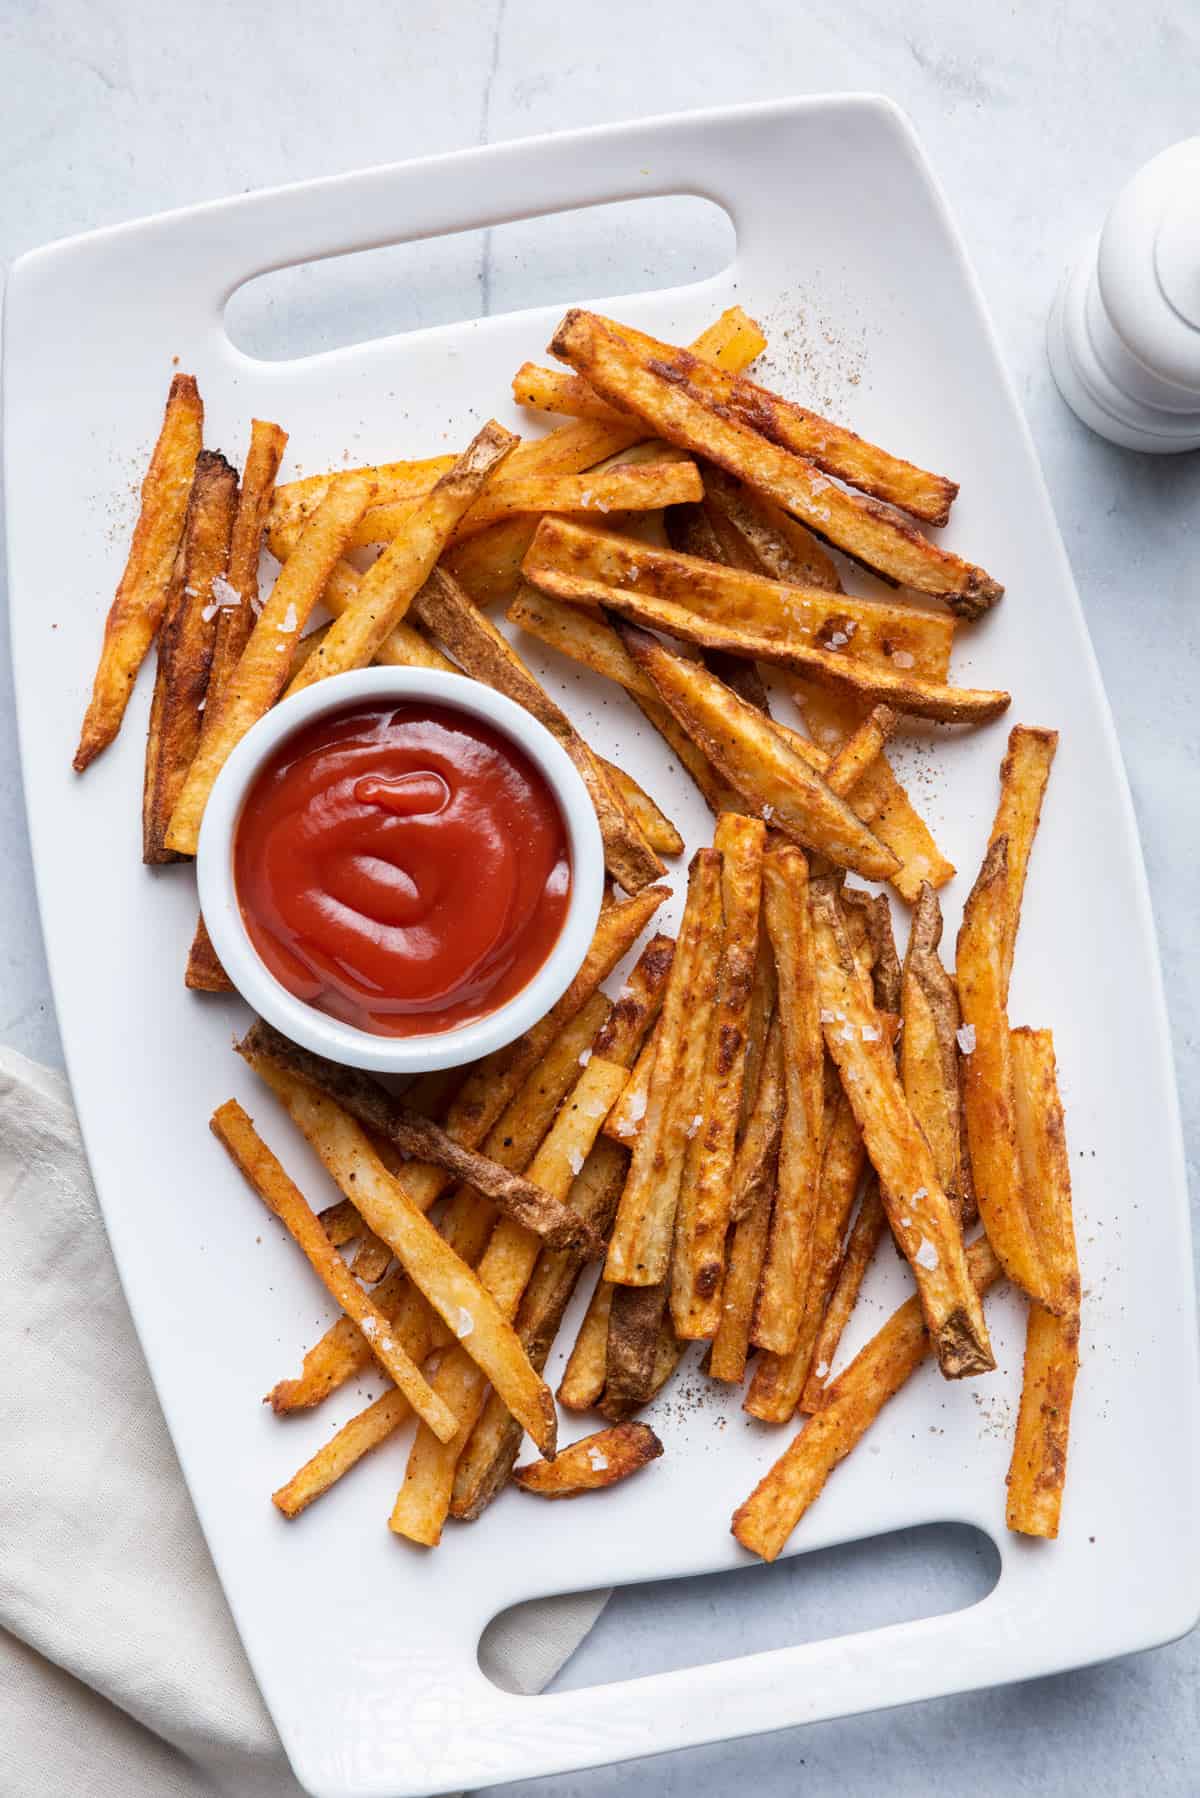 Oven baked french fries on a white plate with a small dipping bowl for the ketchup